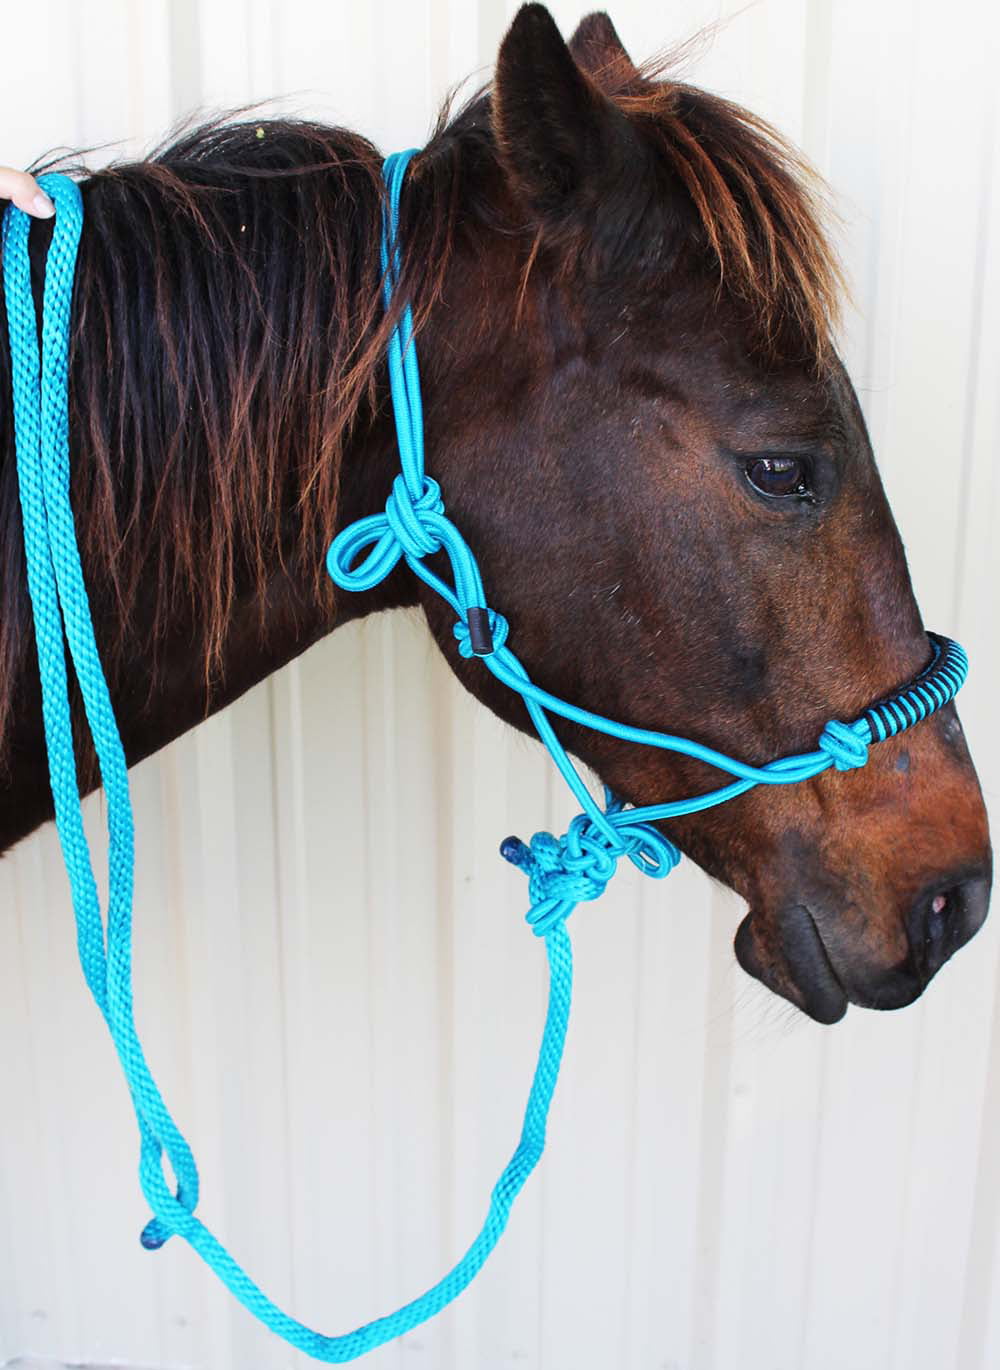 TEAL Full Size Adjustable Nylon Halter w/ 7' Braided Cotton Lead NEW HORSE TACK 